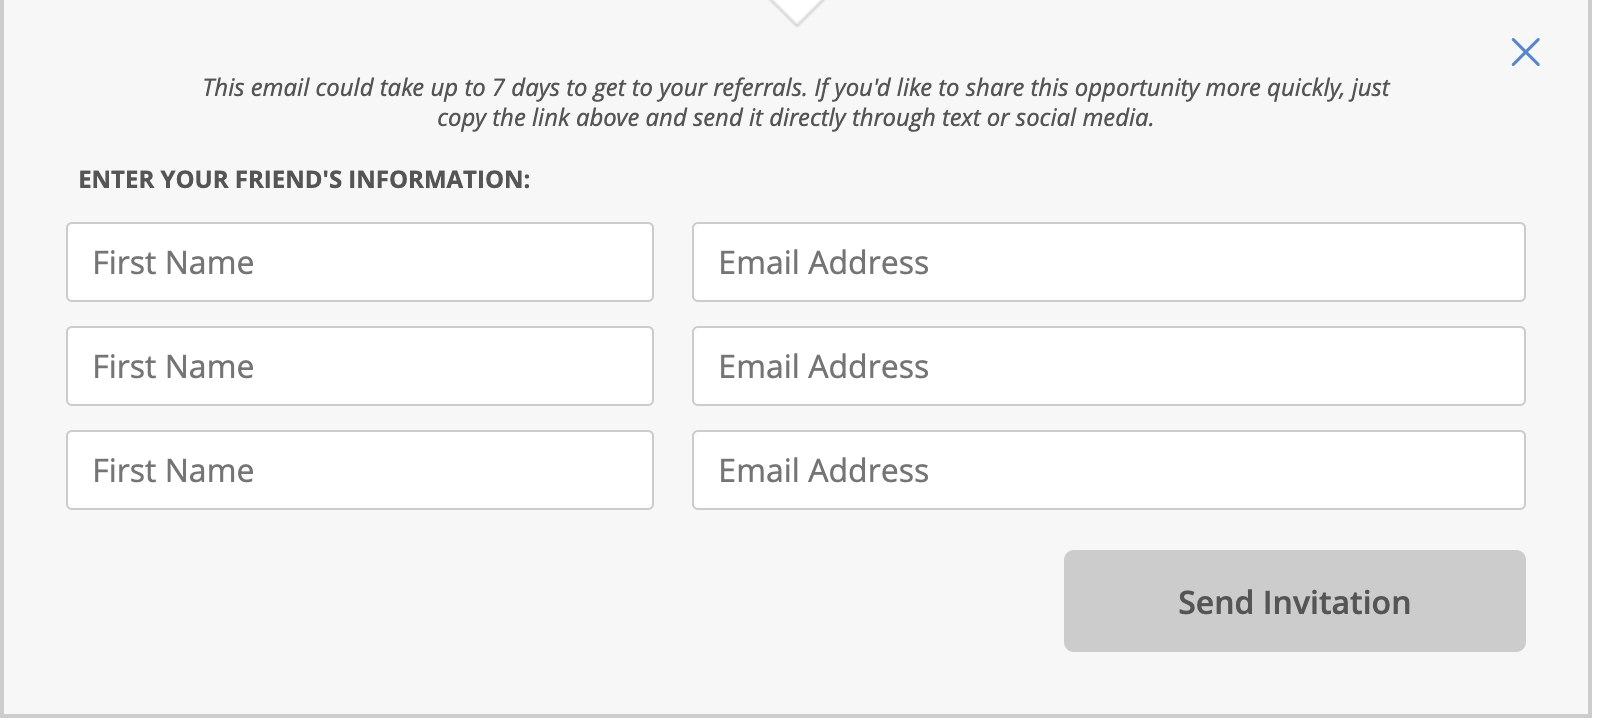 a screenshot of a email form